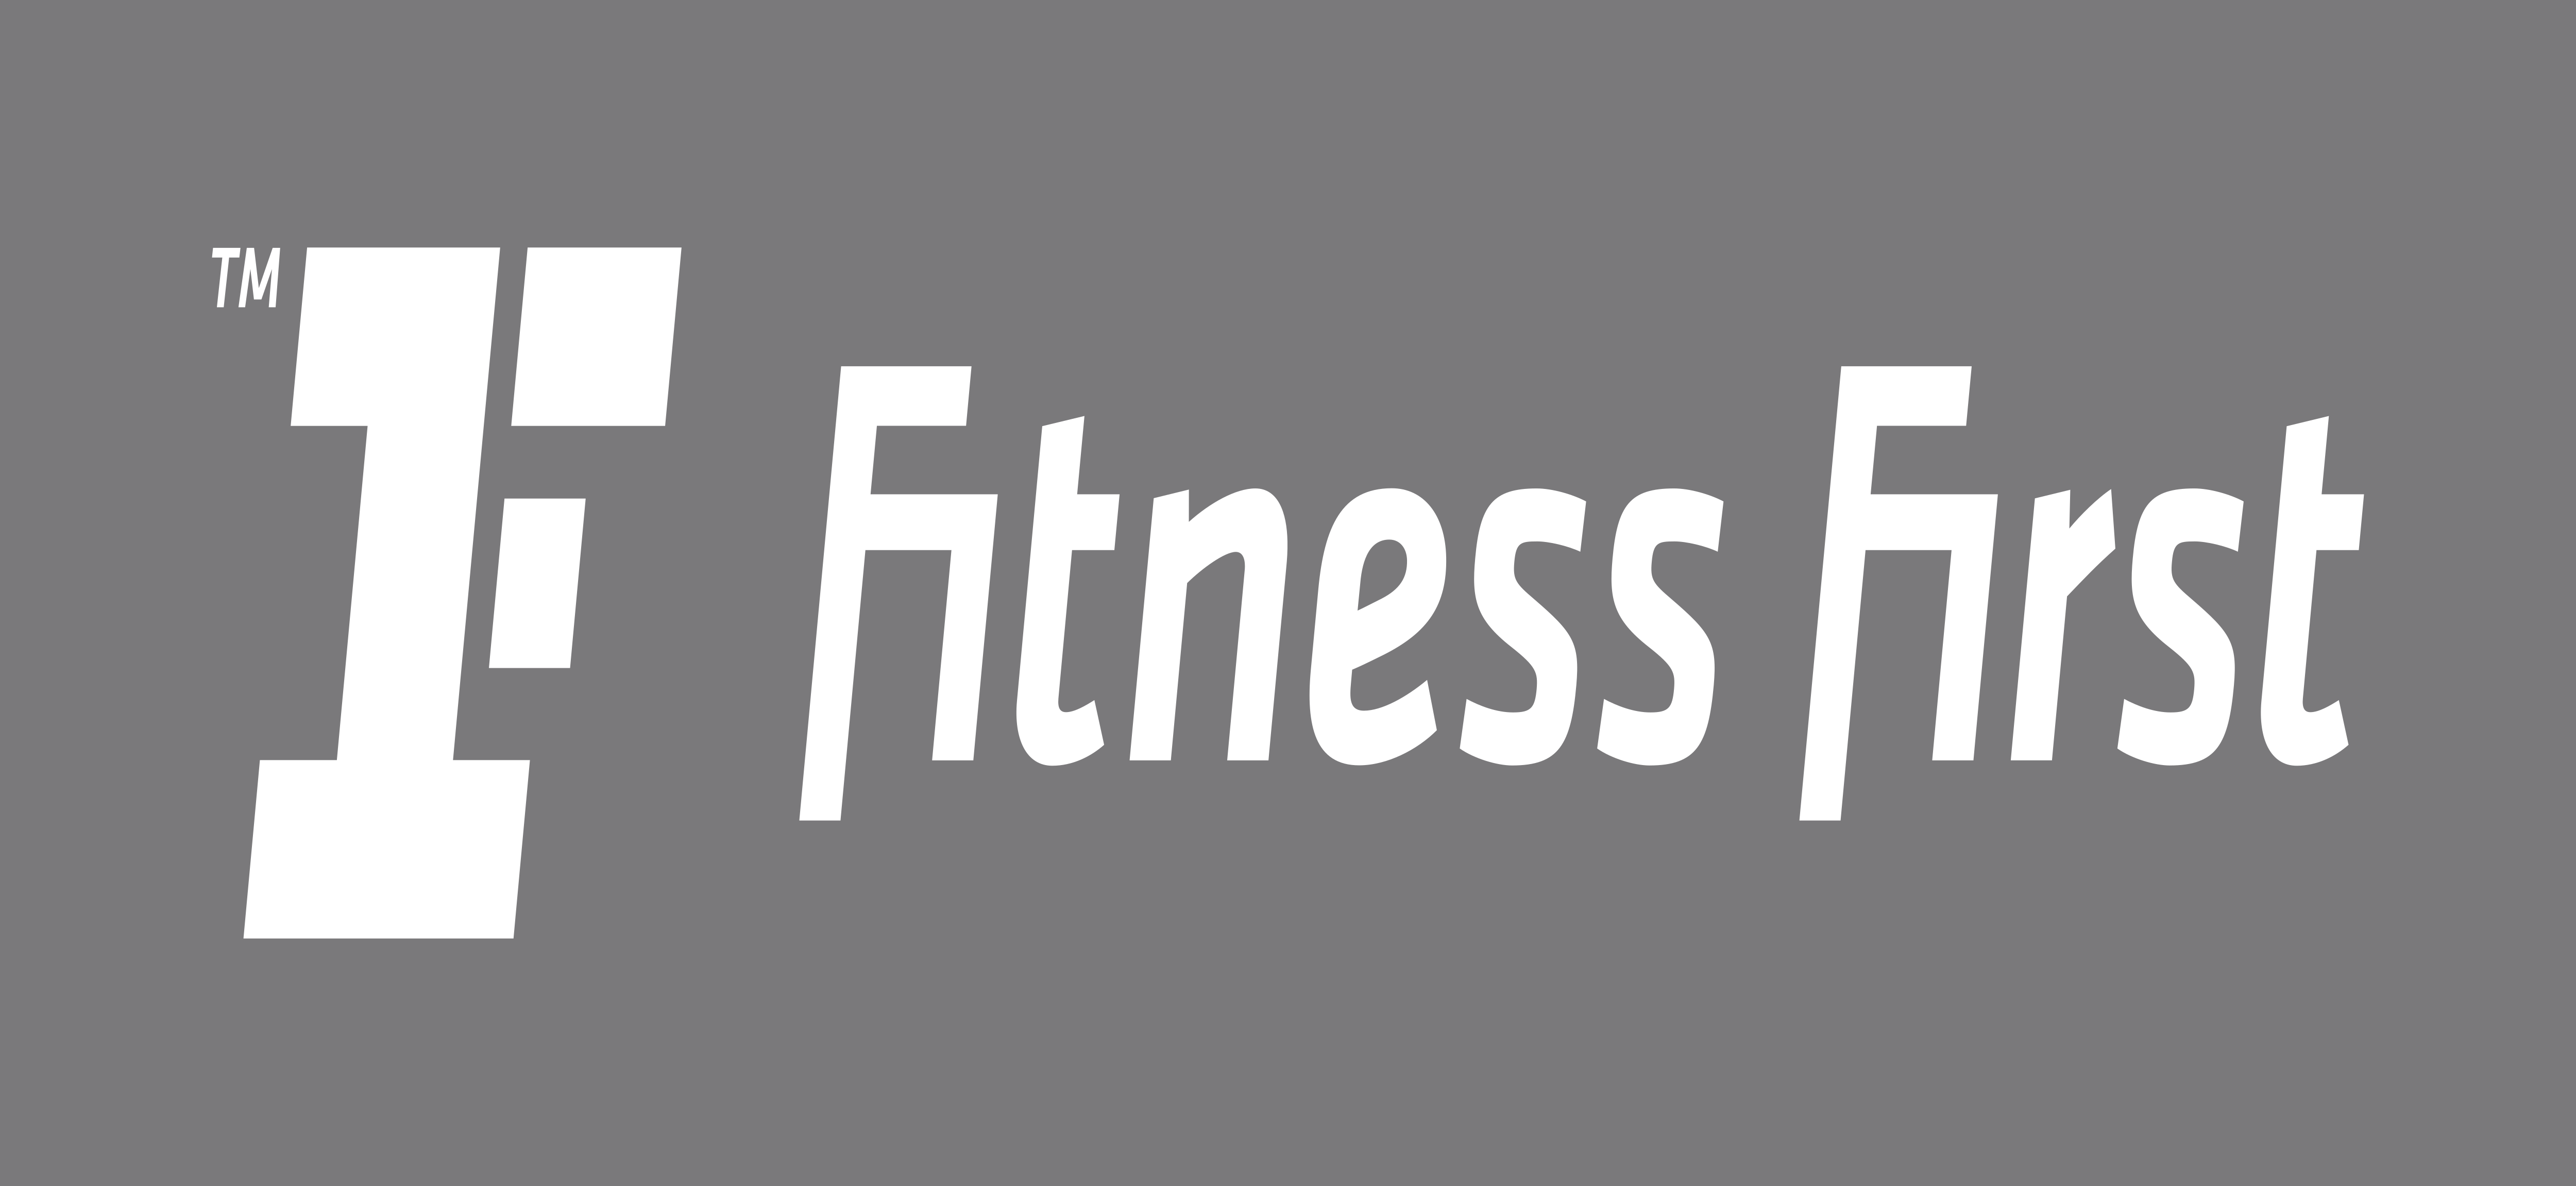 Fitness First – Logos Download